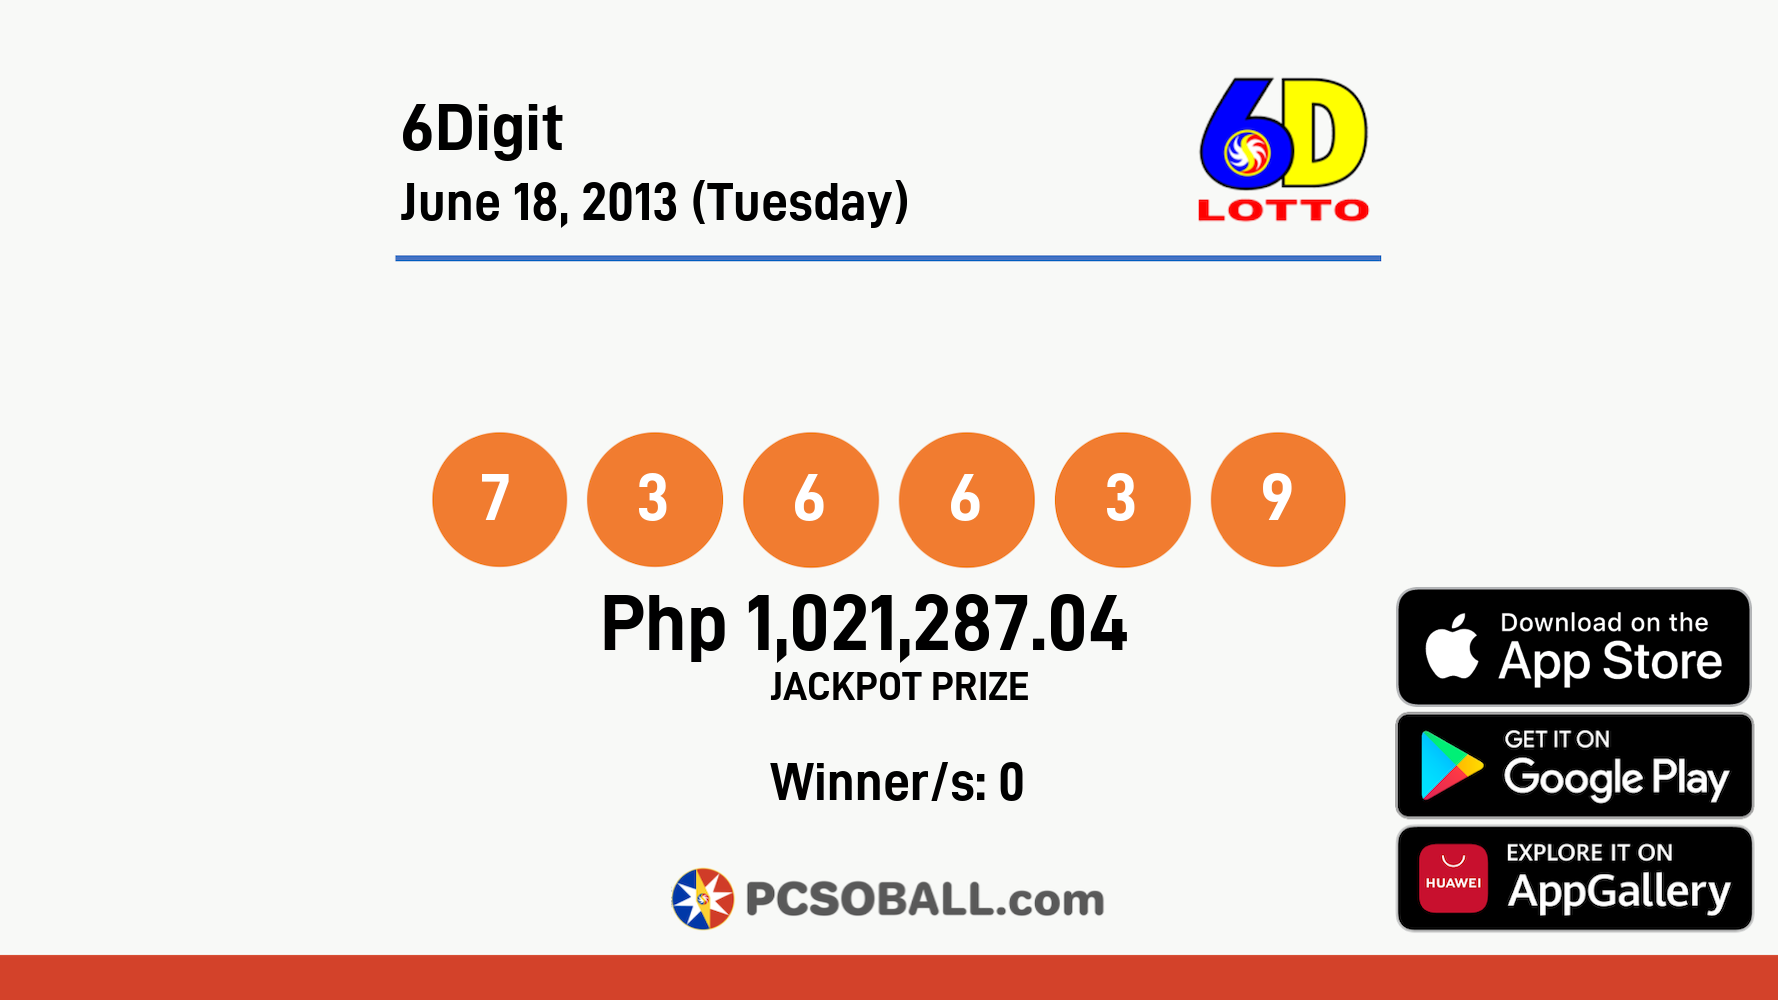 6Digit June 18, 2013 (Tuesday) Result